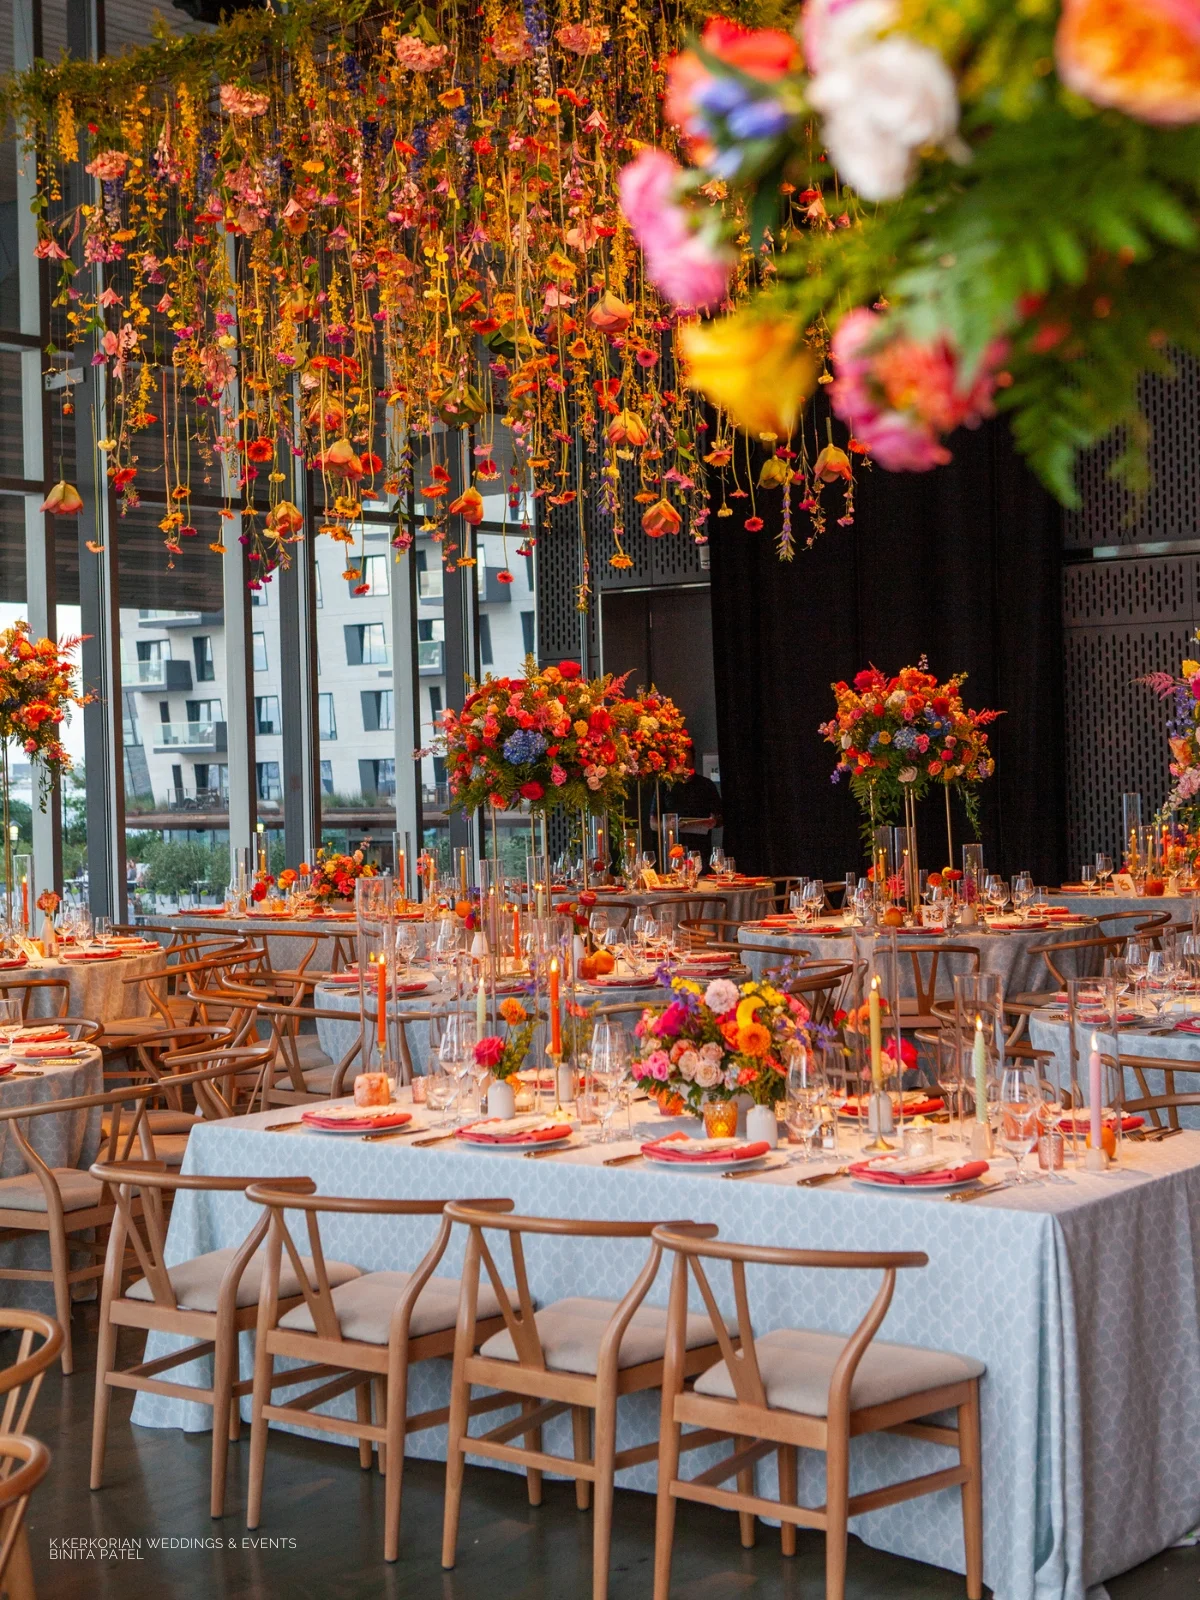 An event linen rental featuring a wedding reception set up with colorful flowers hanging from the ceiling.